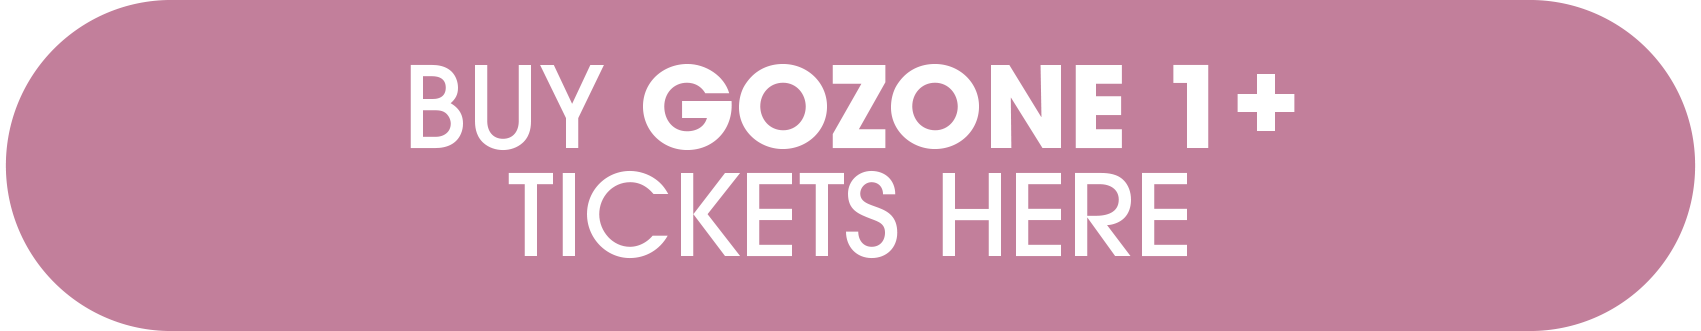 gozoneplus link for tickets